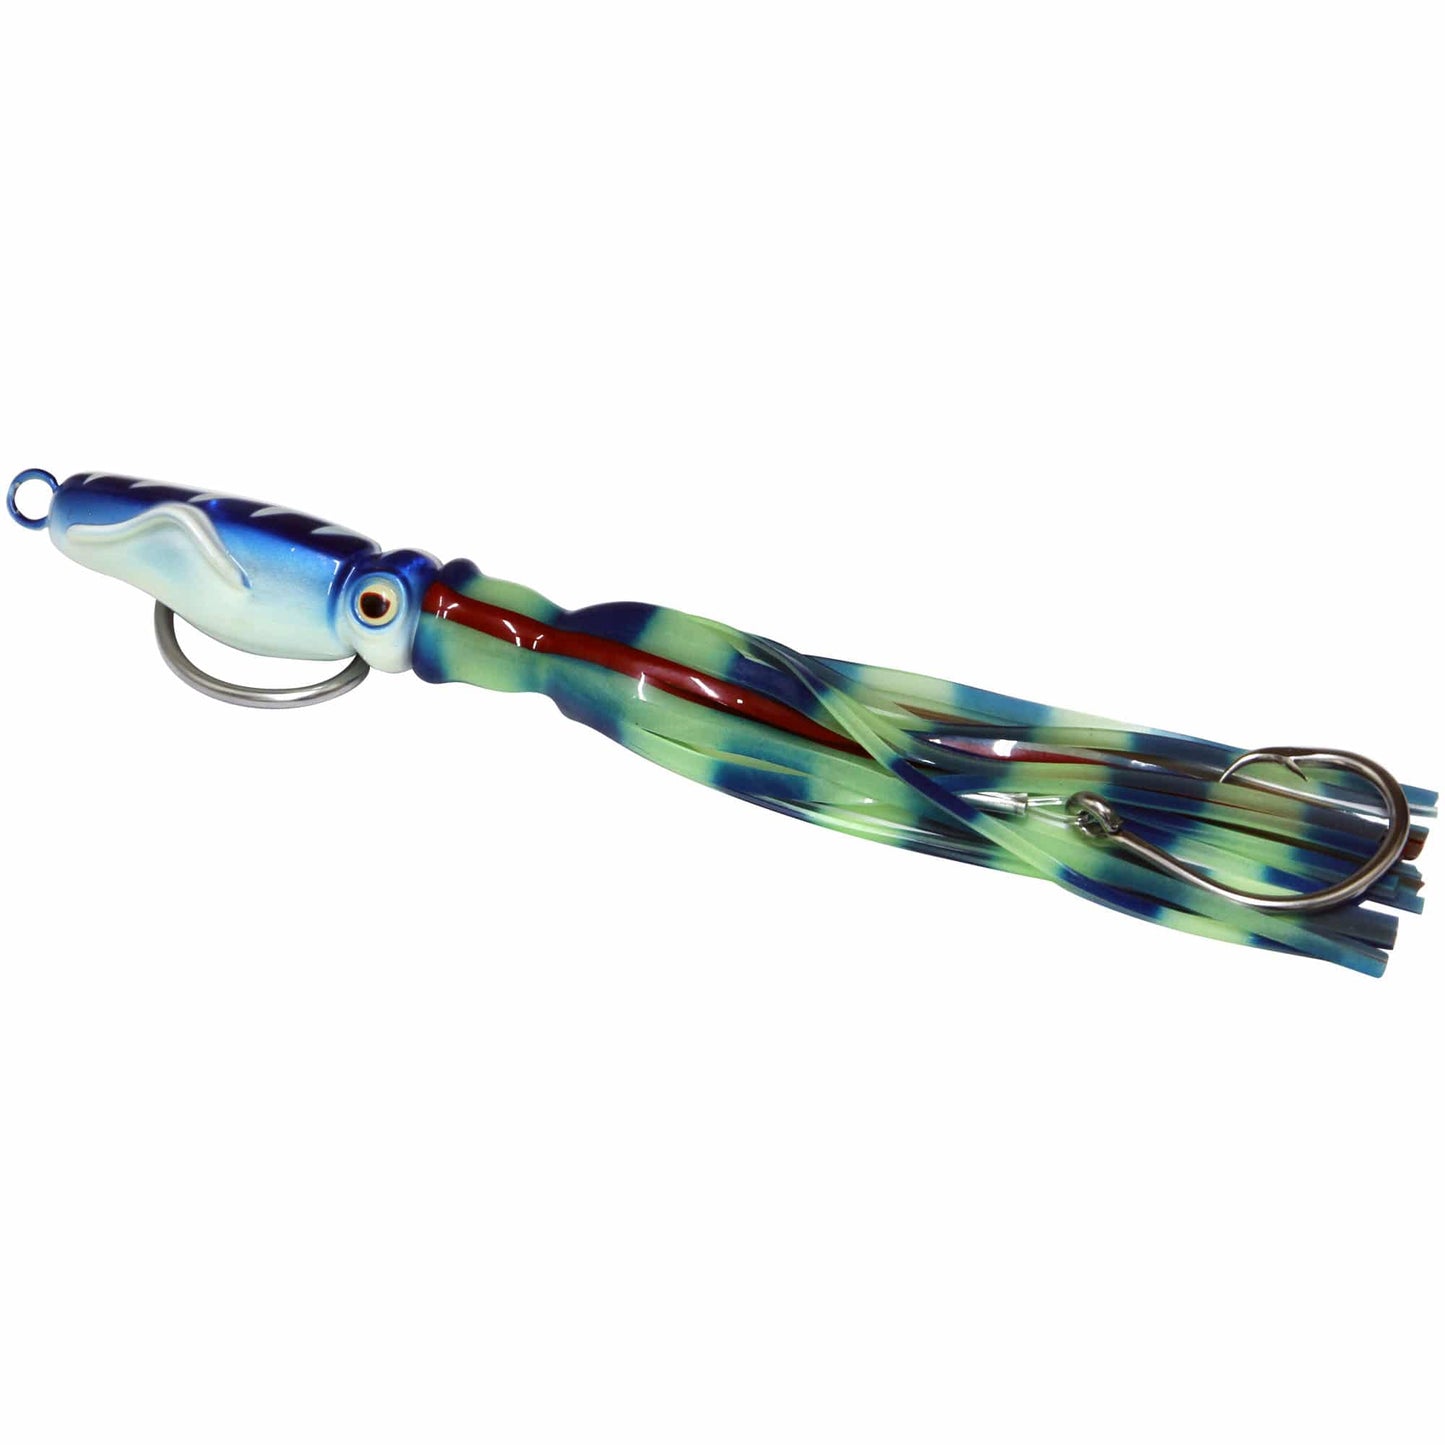 Catch Giant Squidwings-Lure - Jig-Catch-500g-Blue Glow-Fishing Station